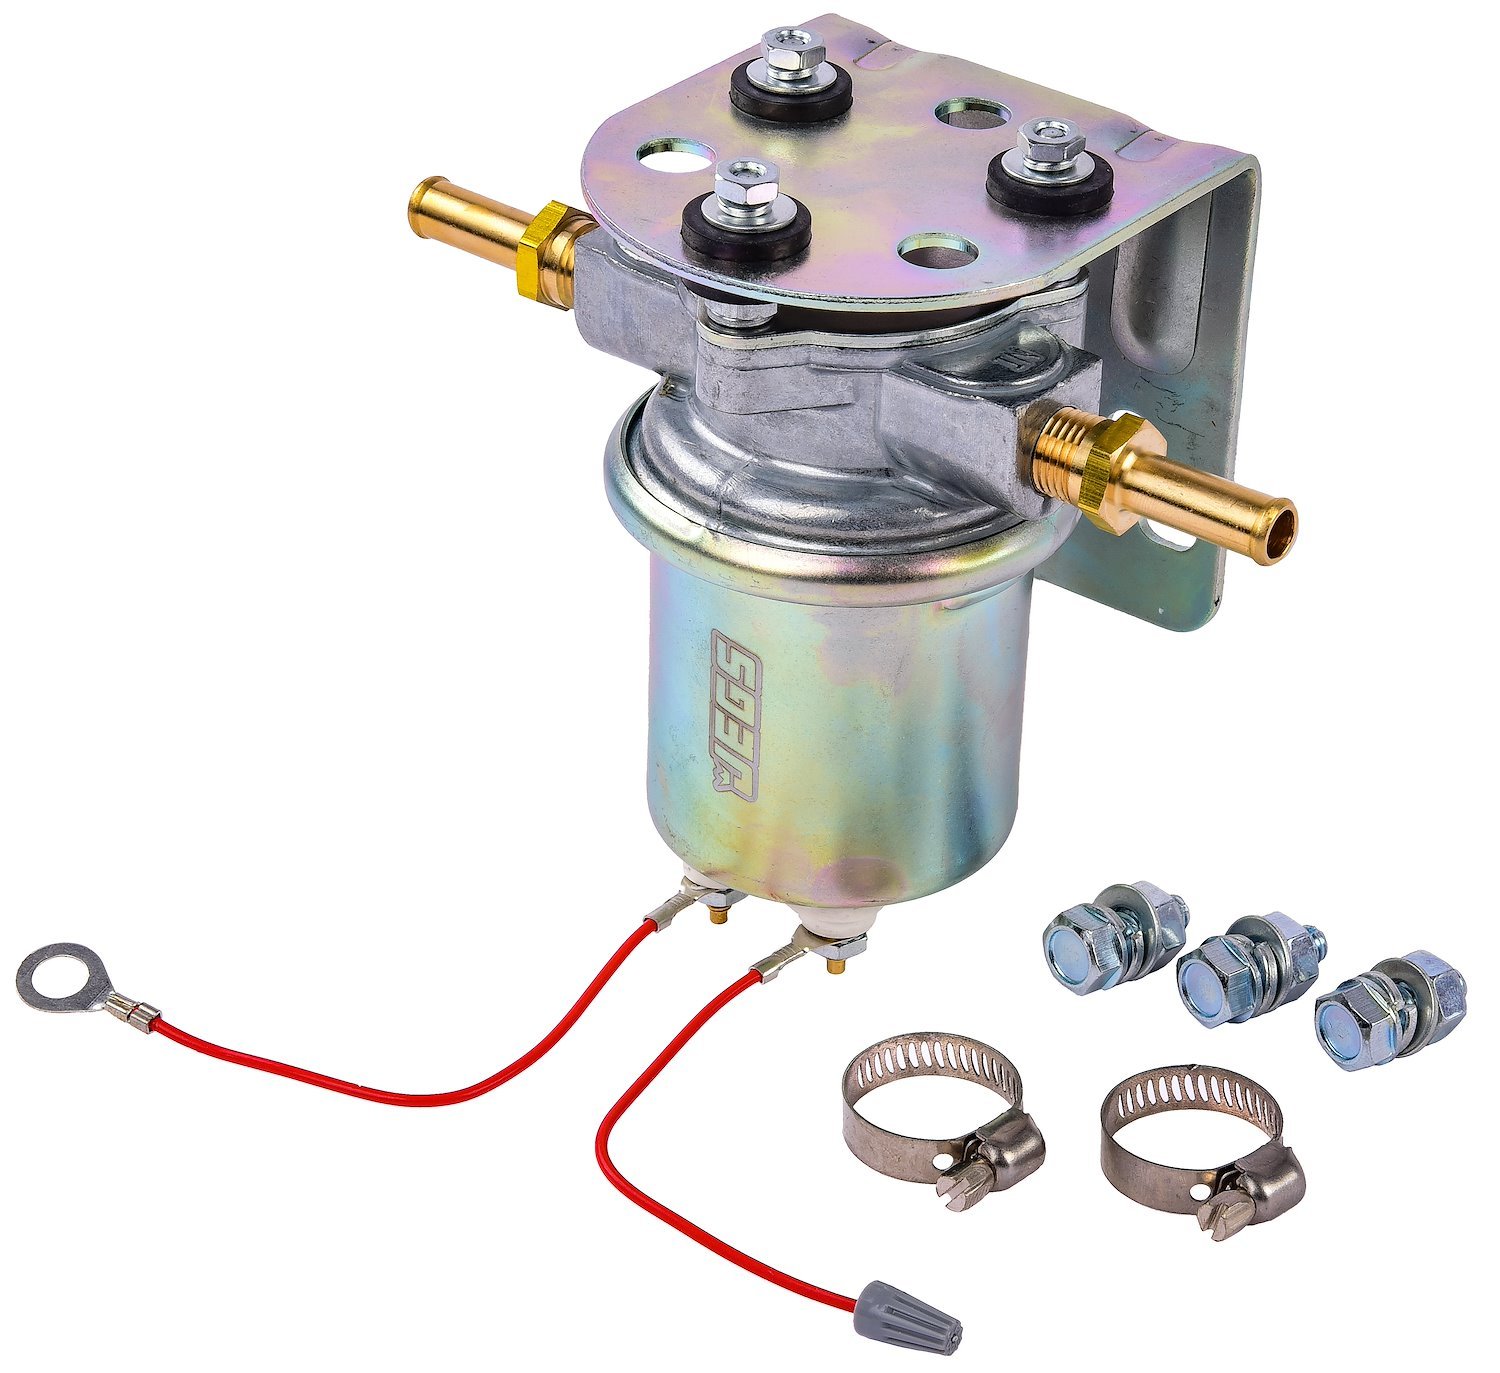 JEGS 555-159072 Electric Fuel Pump - Universal Electric Fuel Pump - JEGS -  JEGS